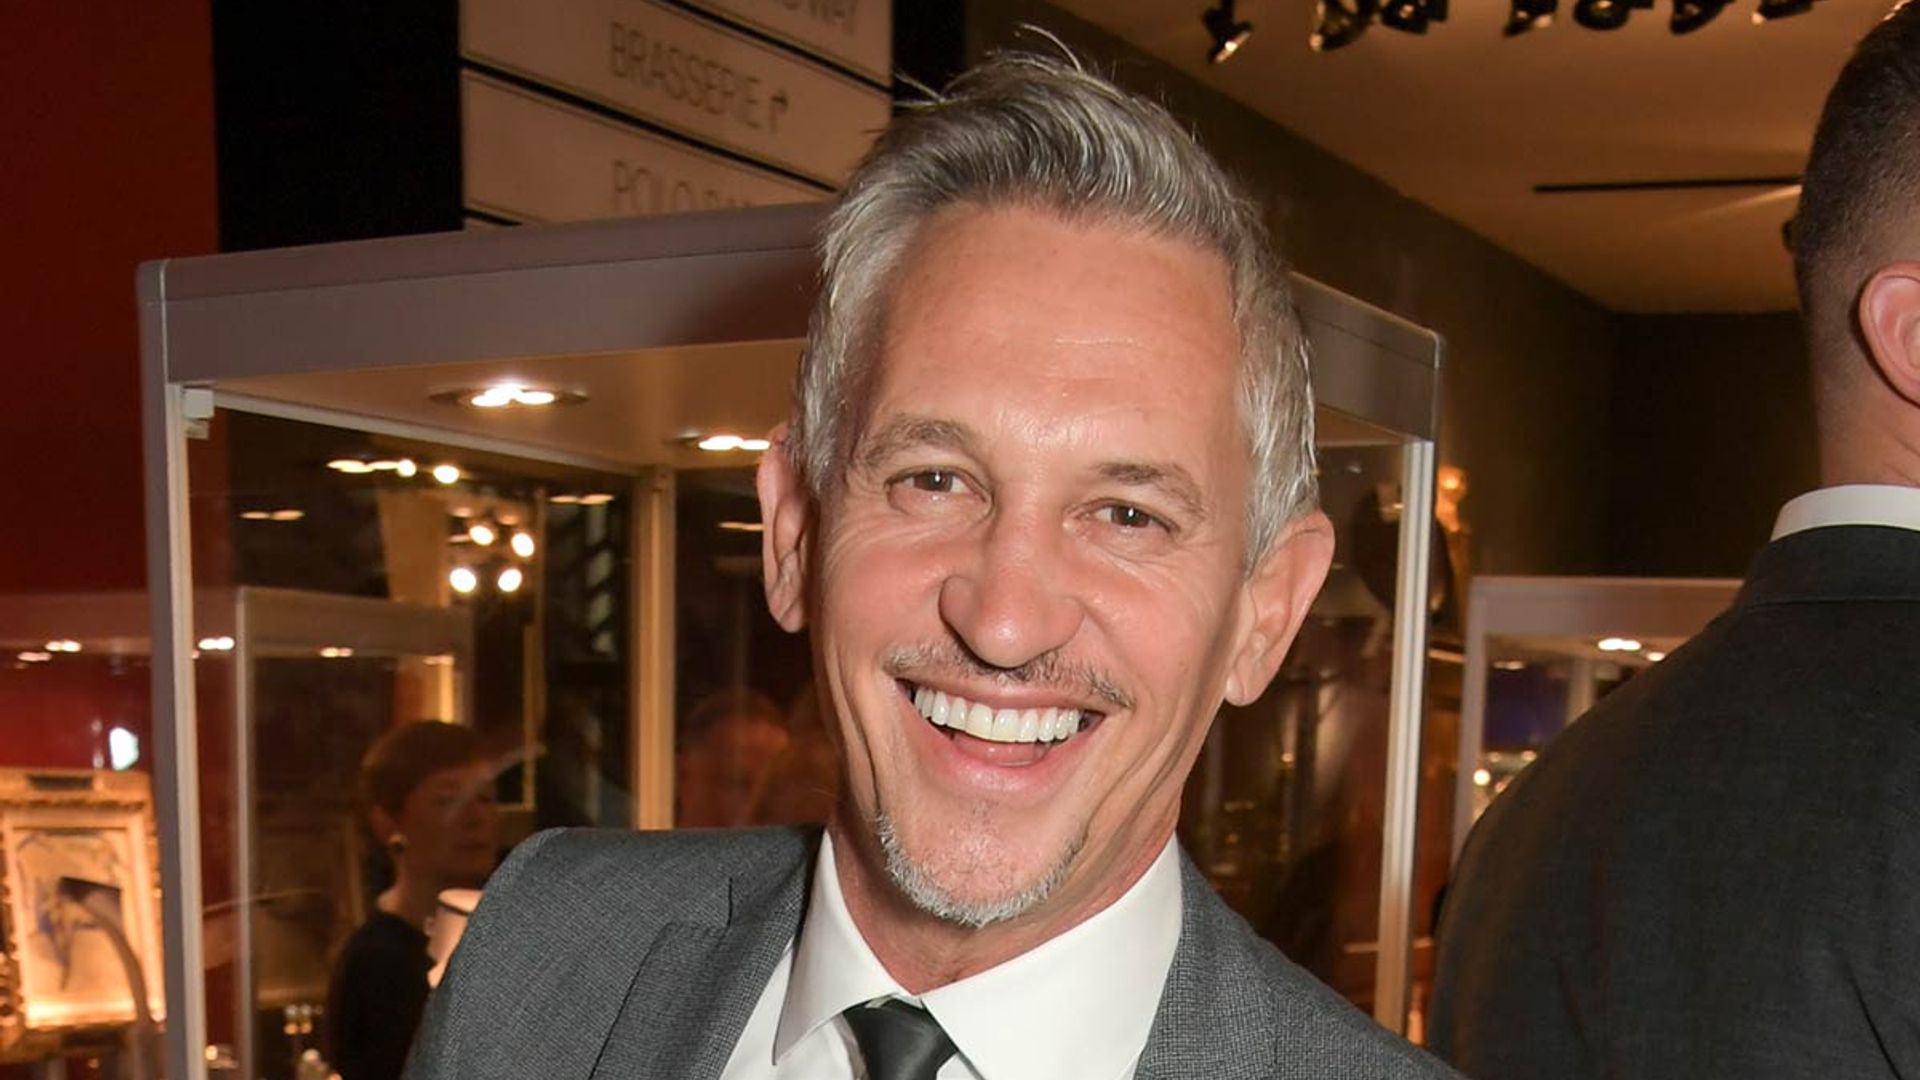 Gary Lineker fans can’t get over his TV screen